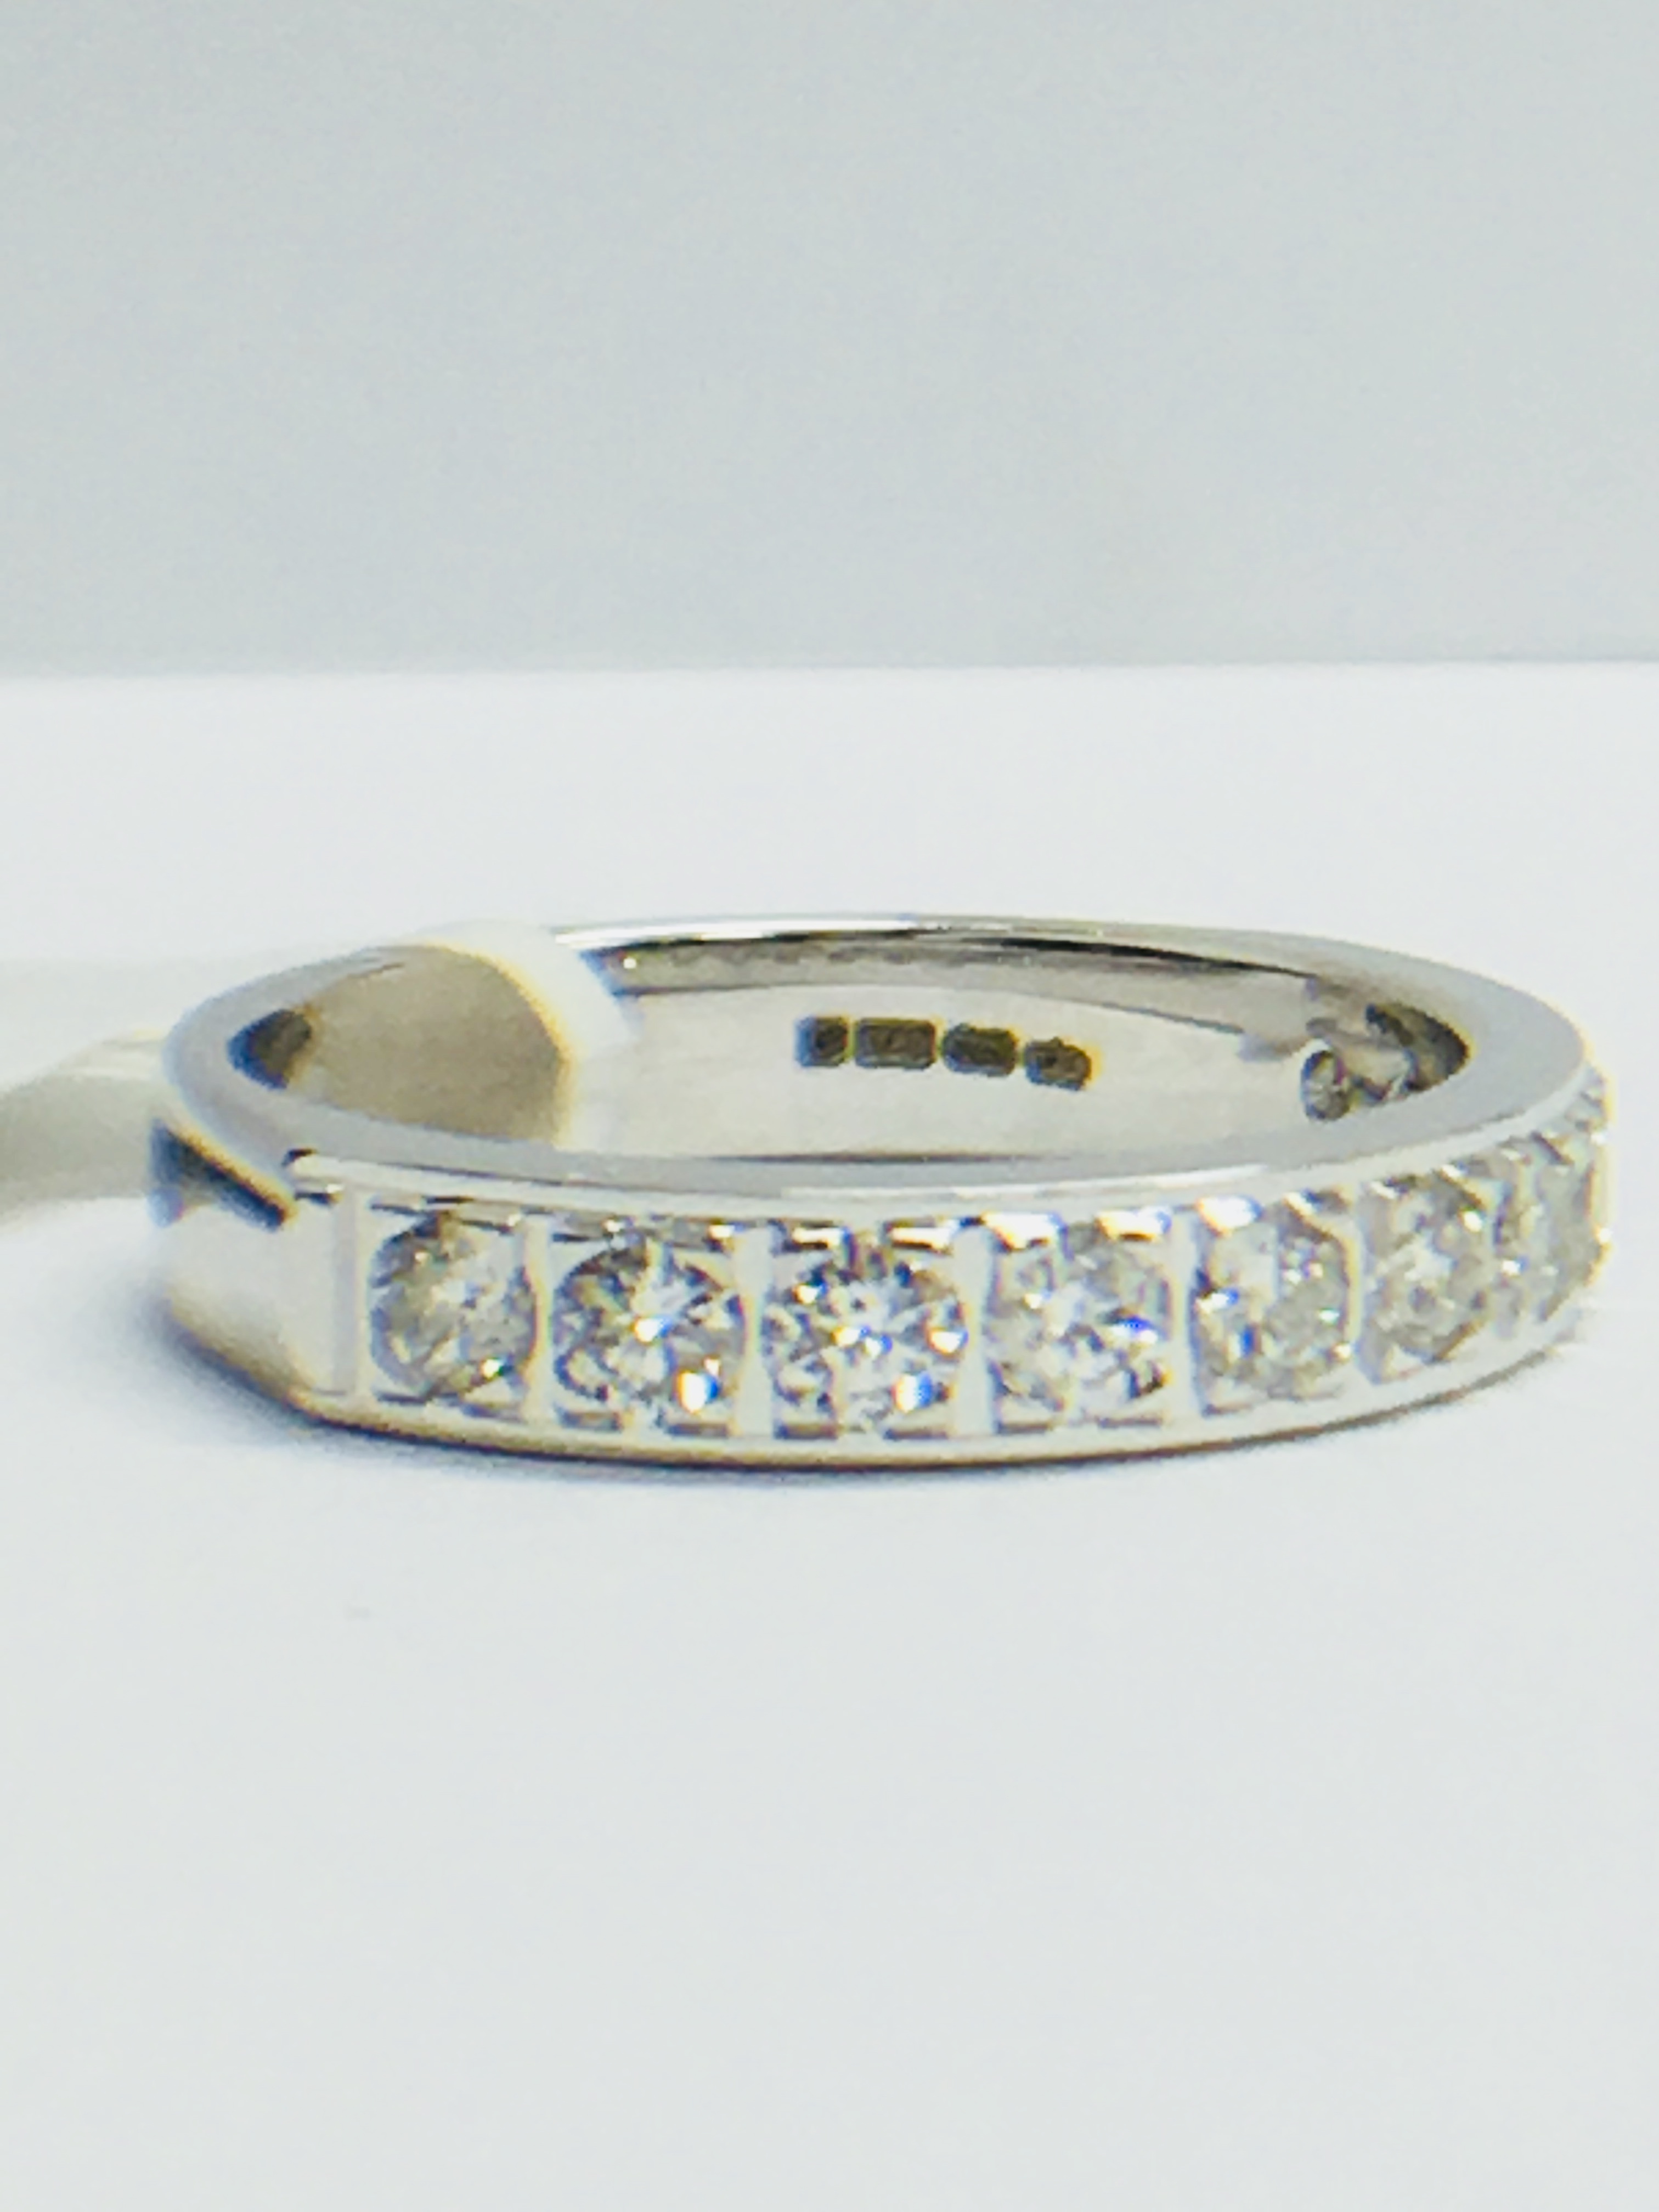 9ct white gold Eternity Ring - Image 5 of 6